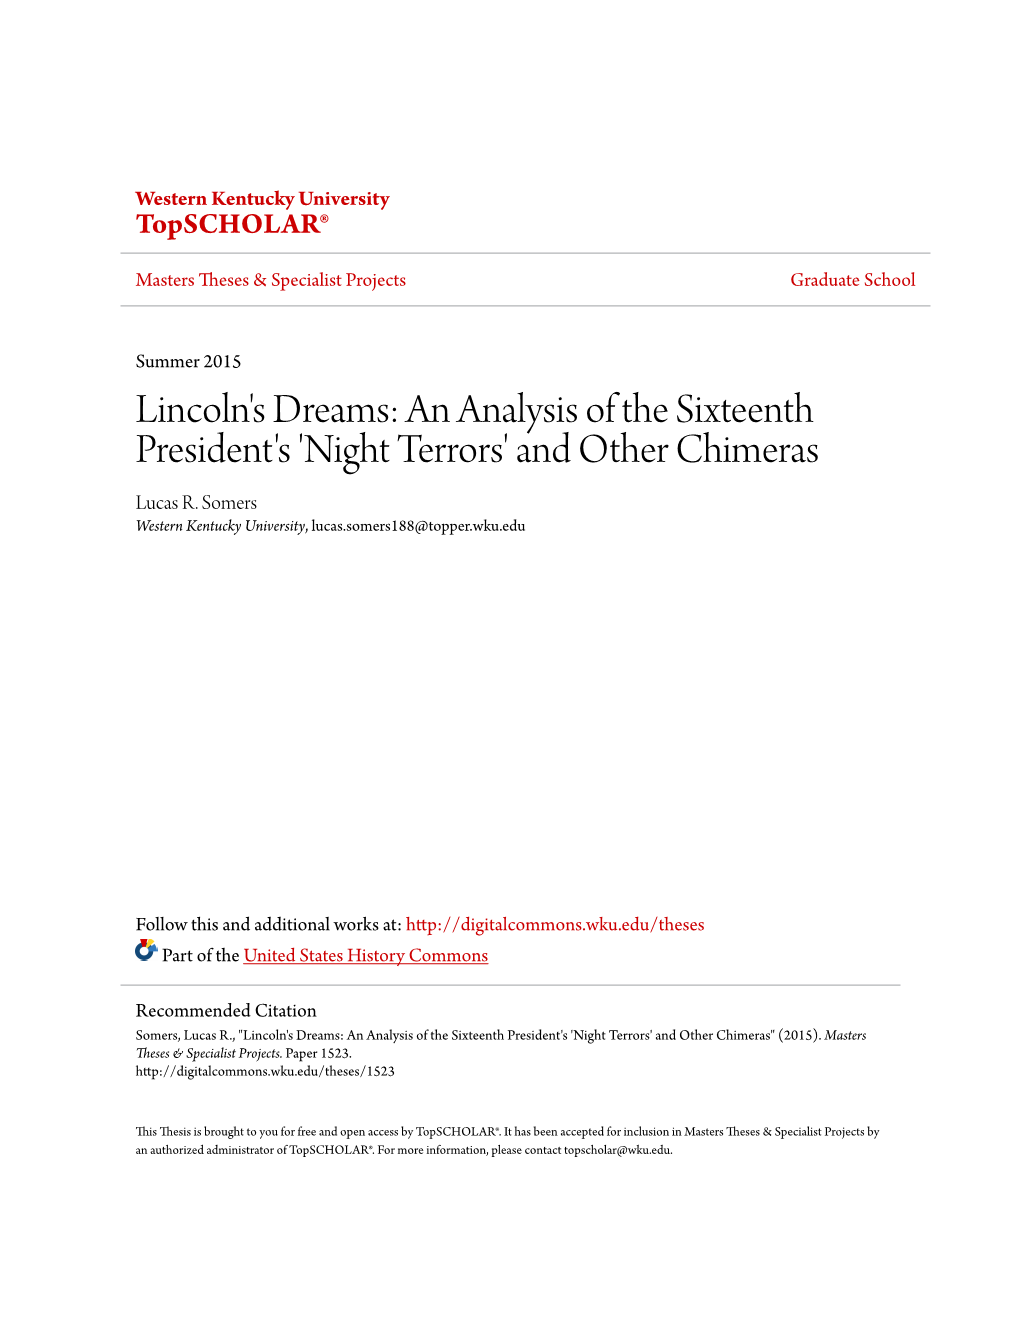 Lincoln's Dreams: an Analysis of the Sixteenth President's 'Night Terrors' and Other Chimeras Lucas R